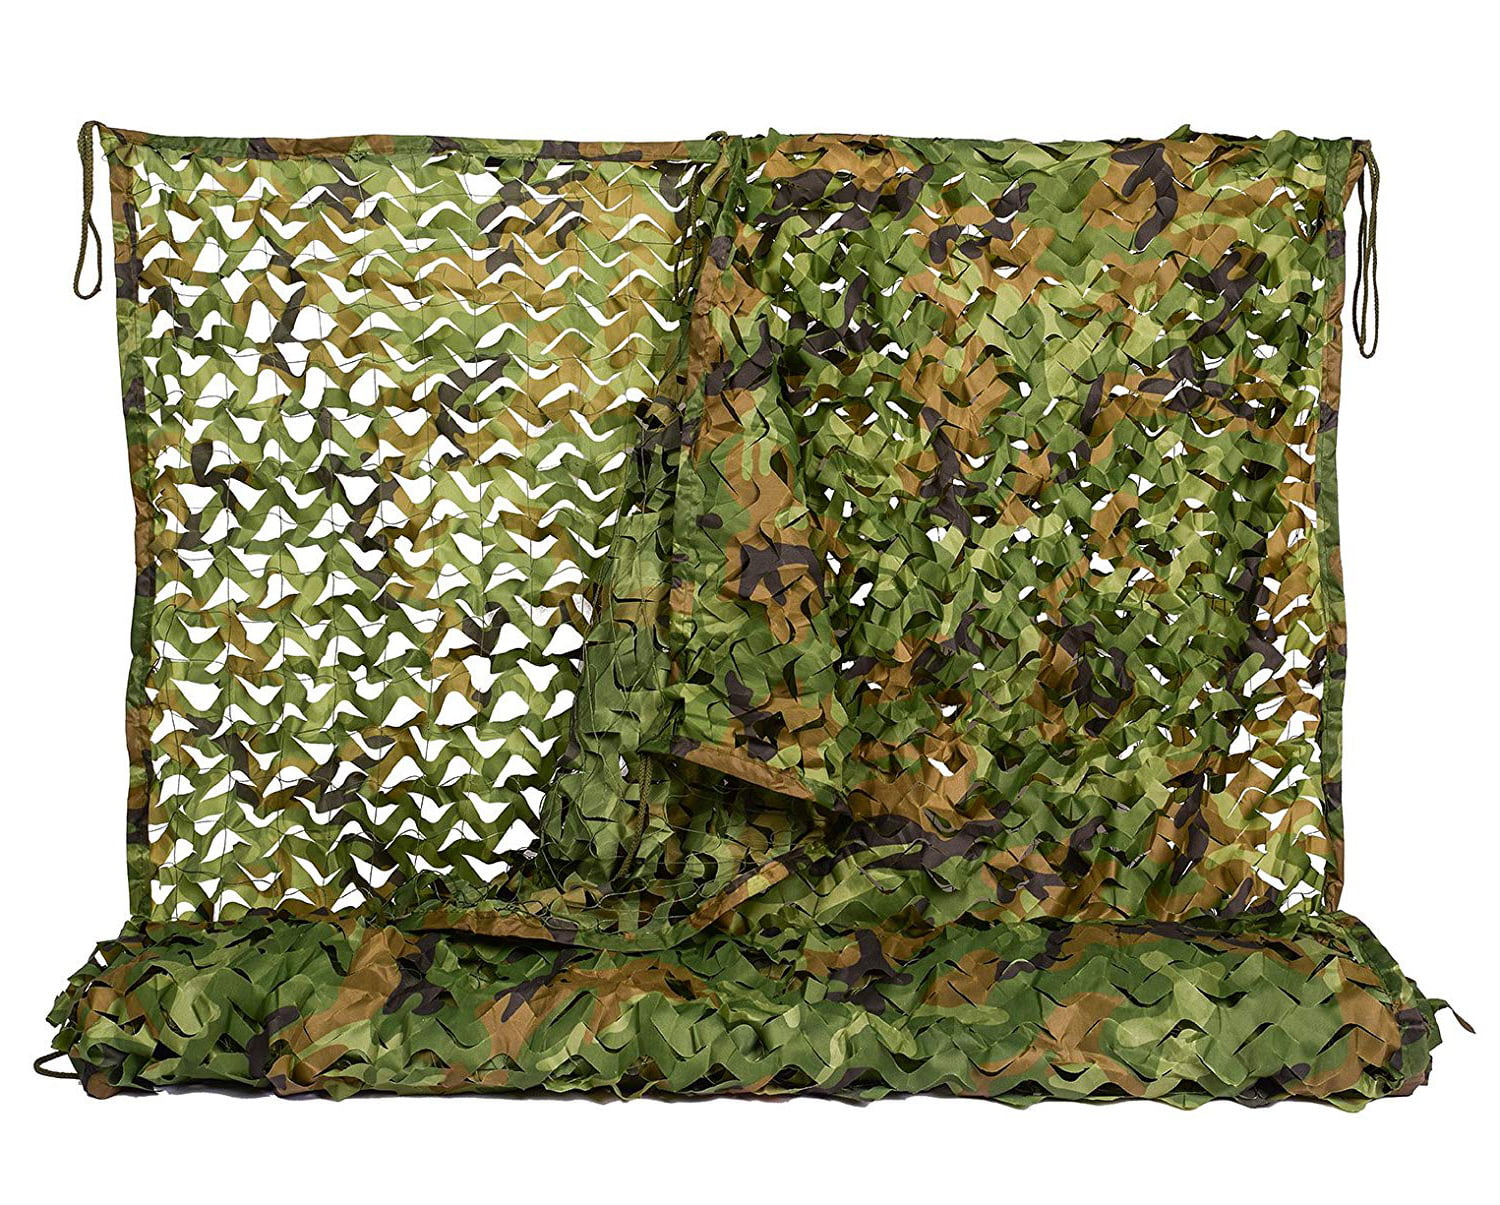 6.5ft Camo Netting Woodland Military Camouflage Mesh Netting for Camping Hunting 